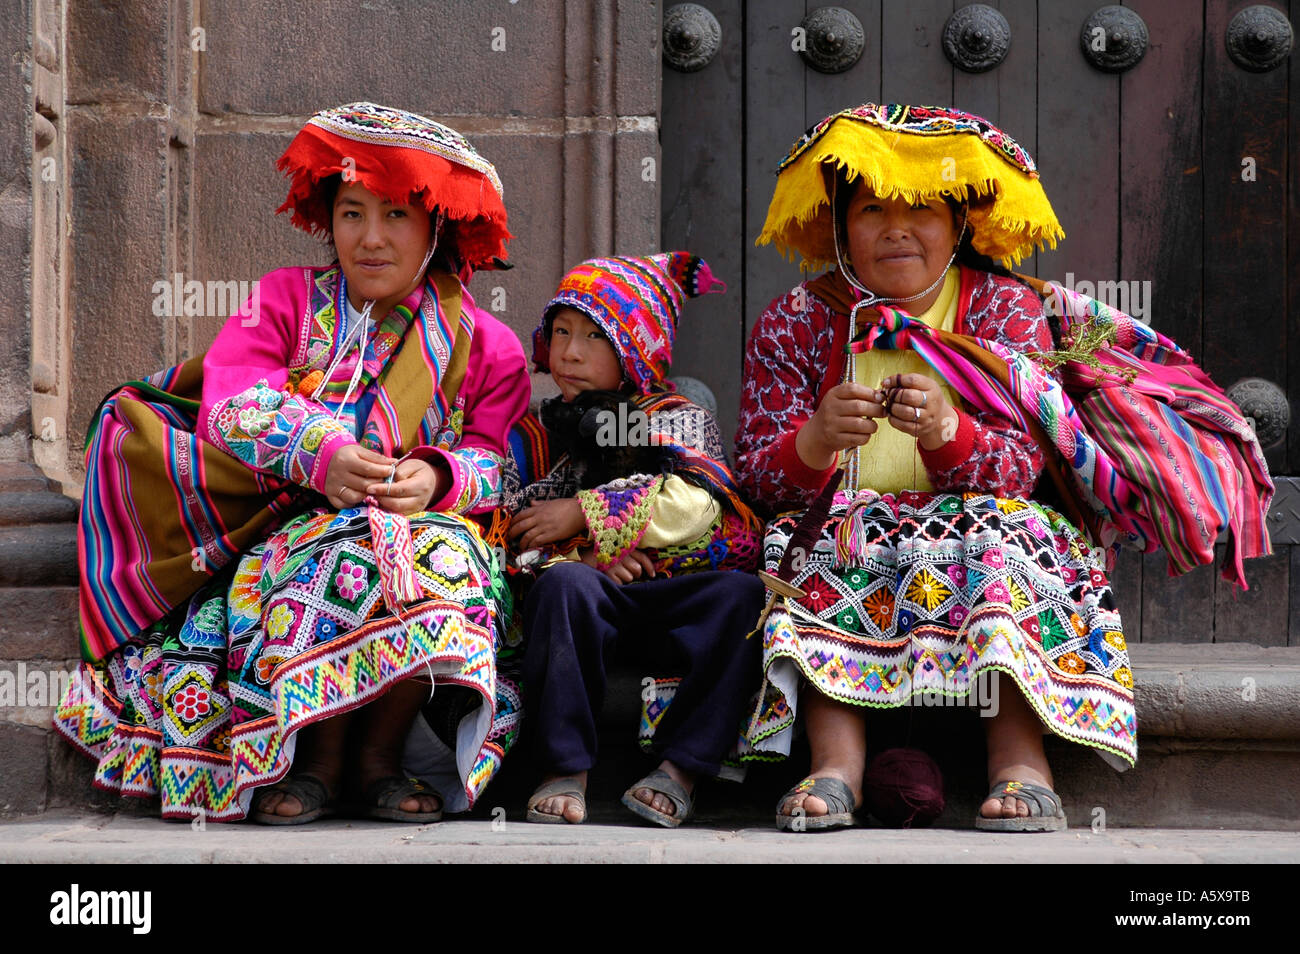 Indigenous Quechua people in typical costume, Cusco, Peru, South America  Stock Photo - Alamy